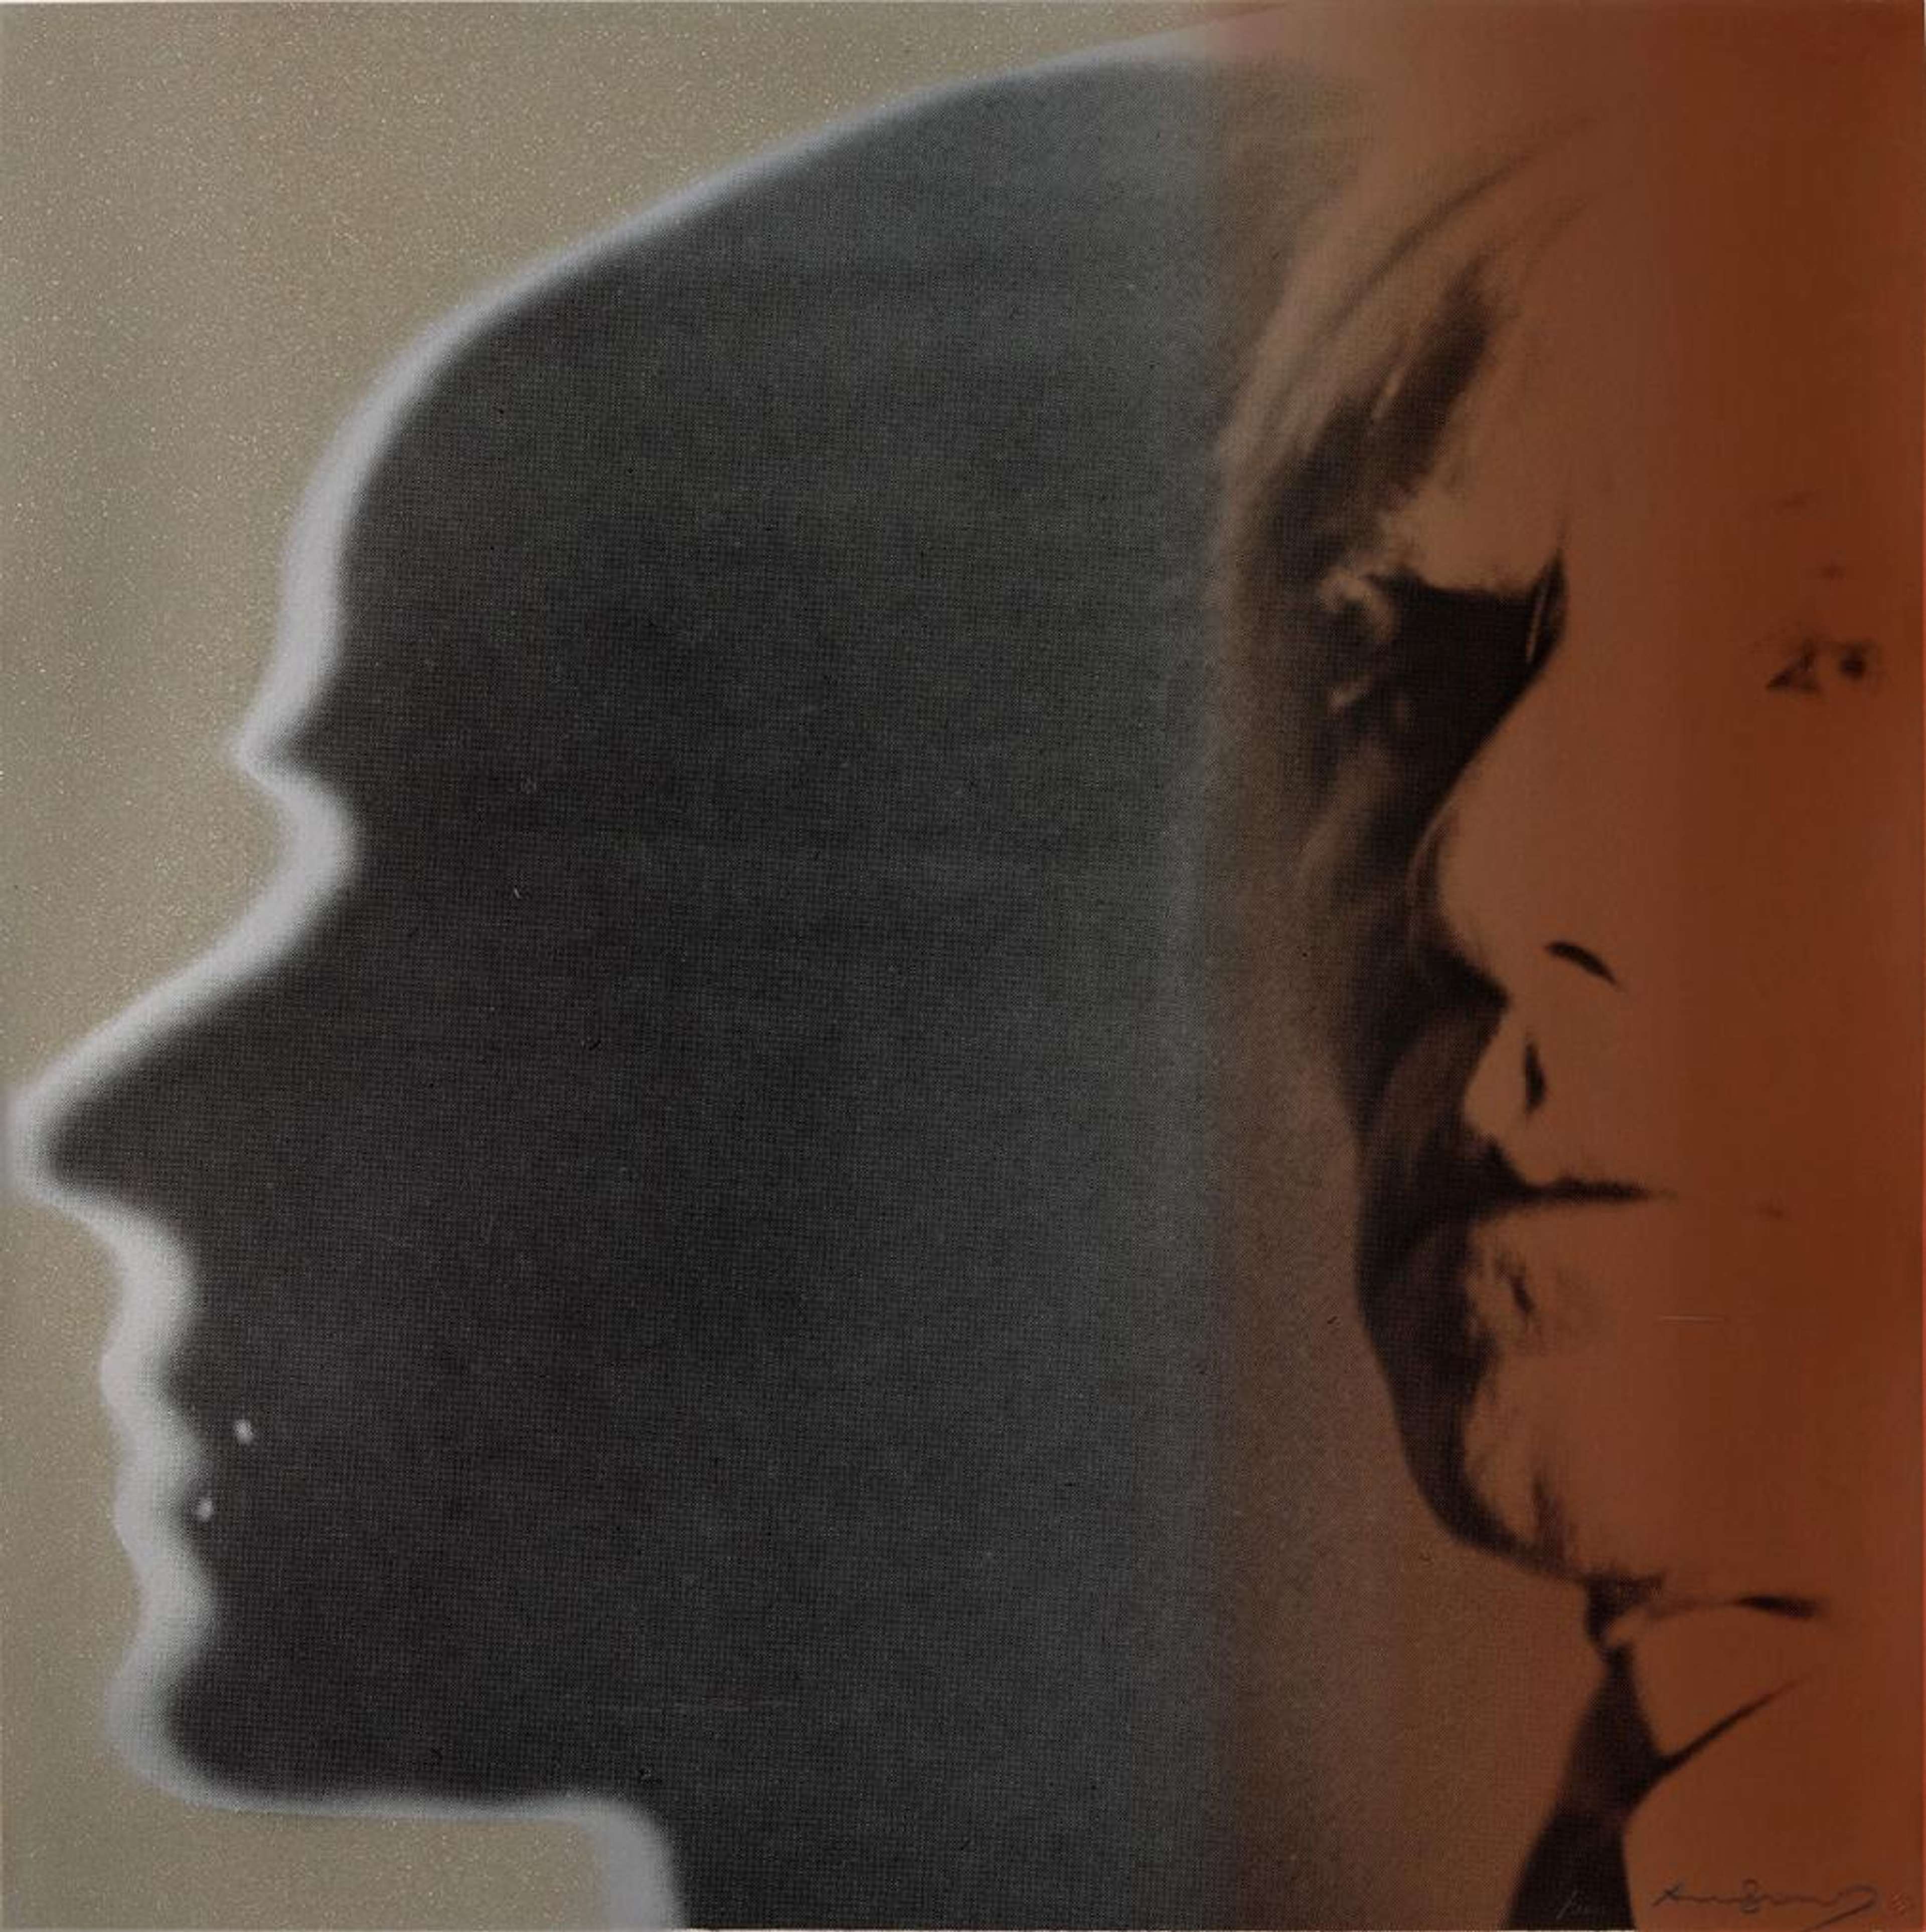 In this print, Warhol renders his portrait in a looser style, delineating the outline of his face with crayon-like blue gestural lines set against a warm red and orange backdrop. Behind Warhol’s portrait is the shadow of another figure’s profile which is staring to the left of the composition.